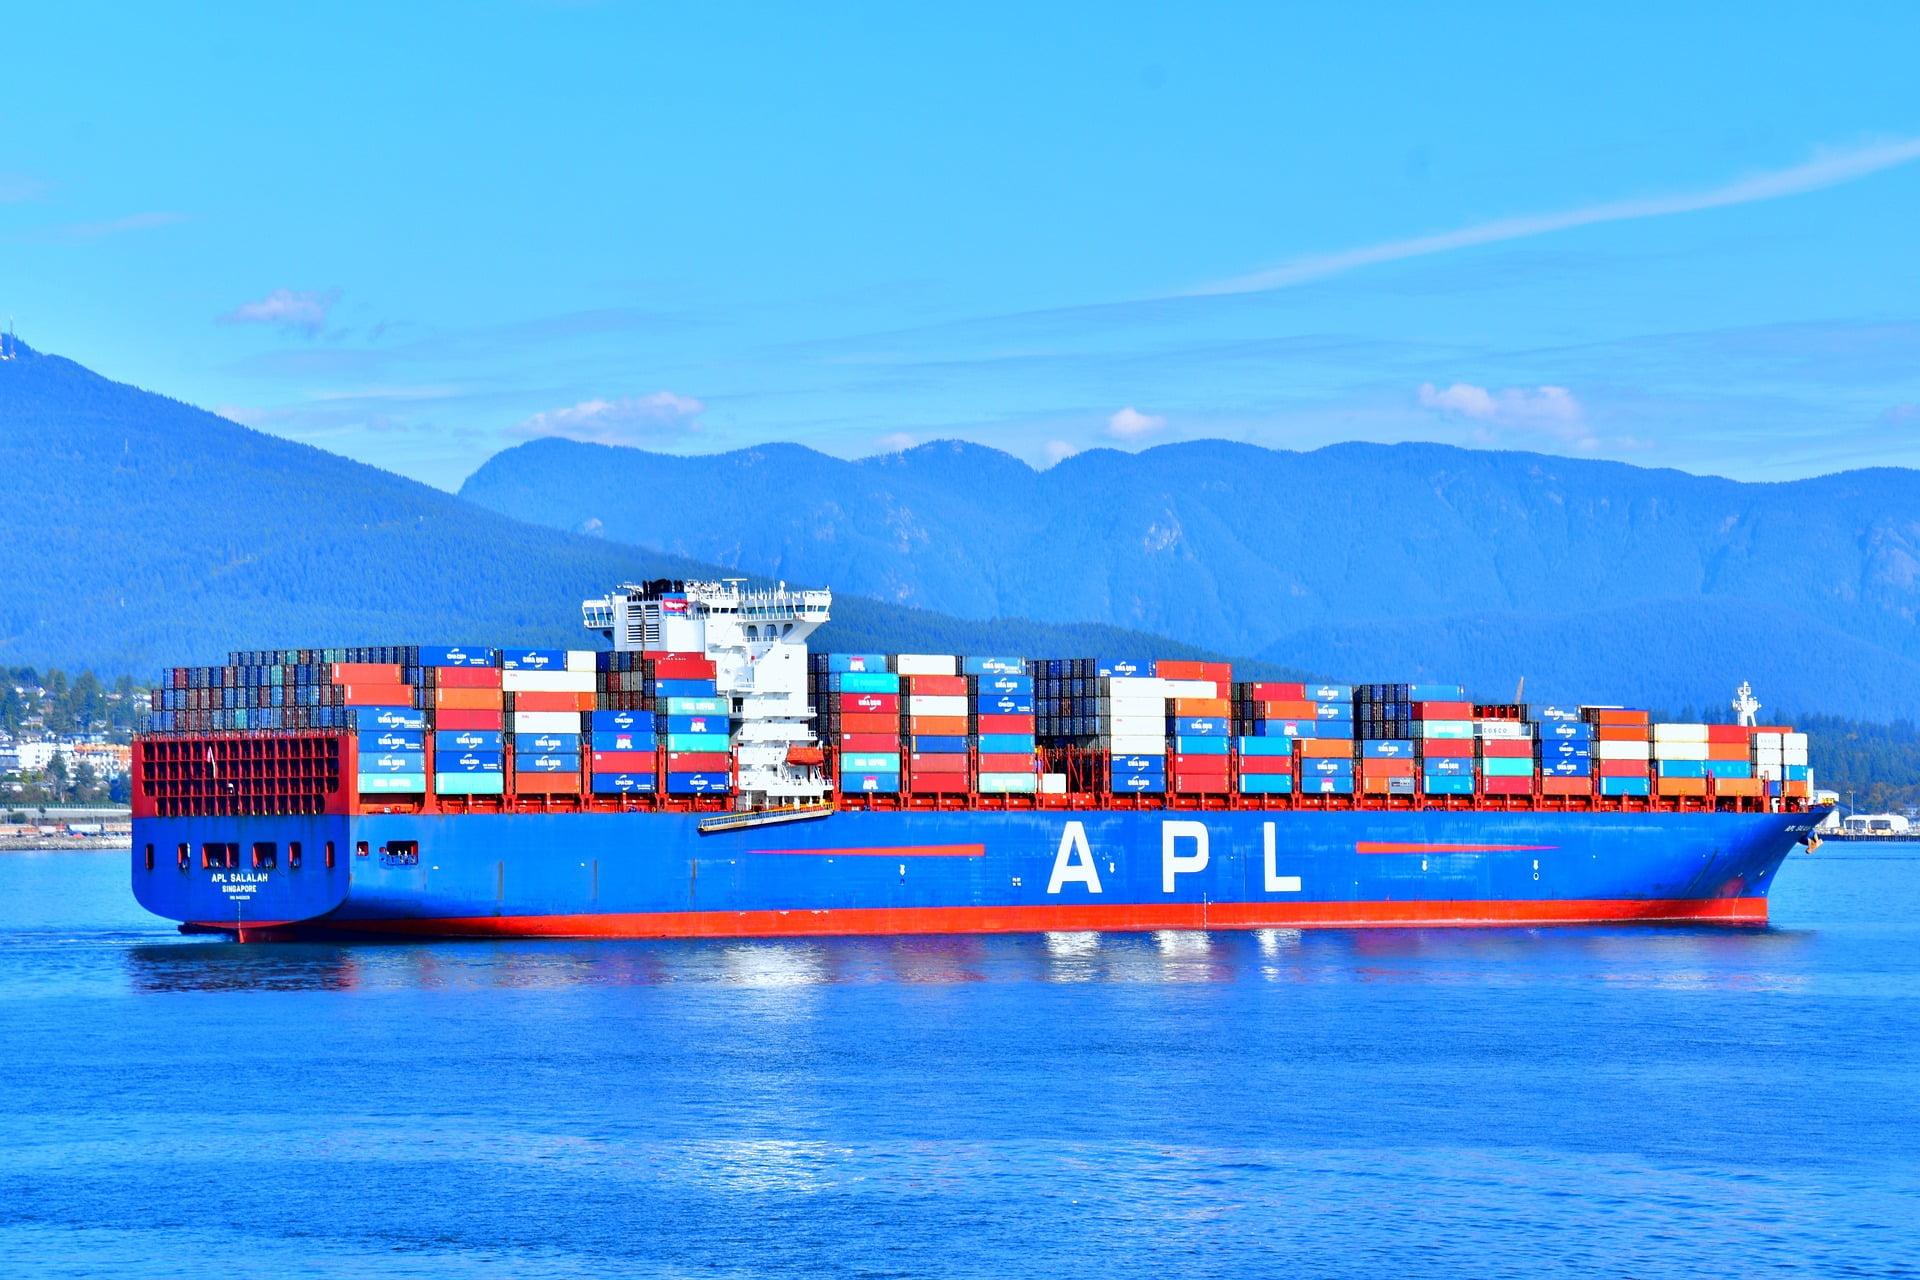 A picture of a cargo ship full of containers shipping items with a blue sky and sea